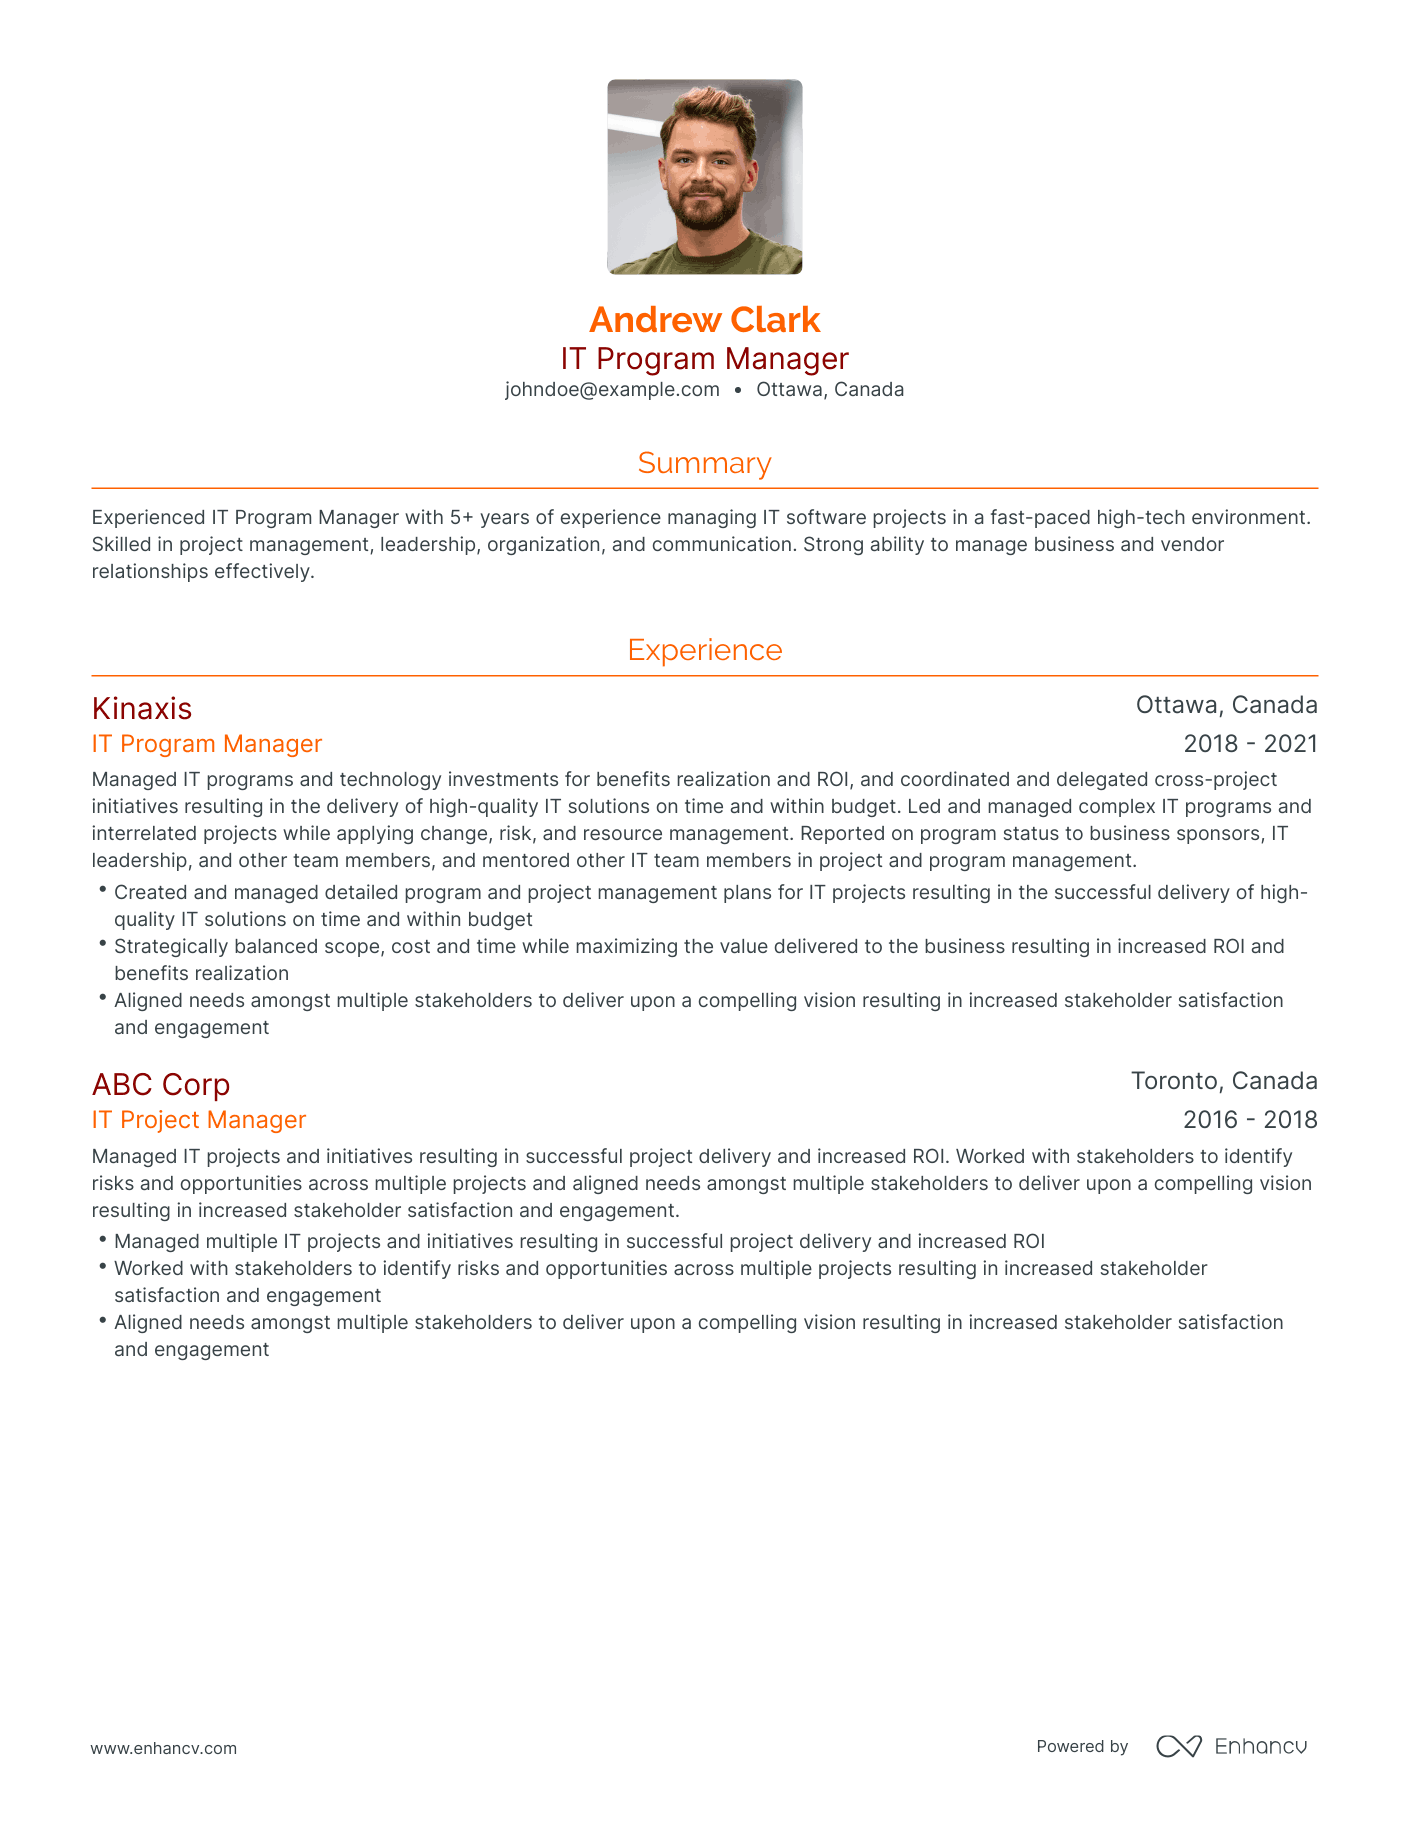 Traditional IT Program Manager Resume Template